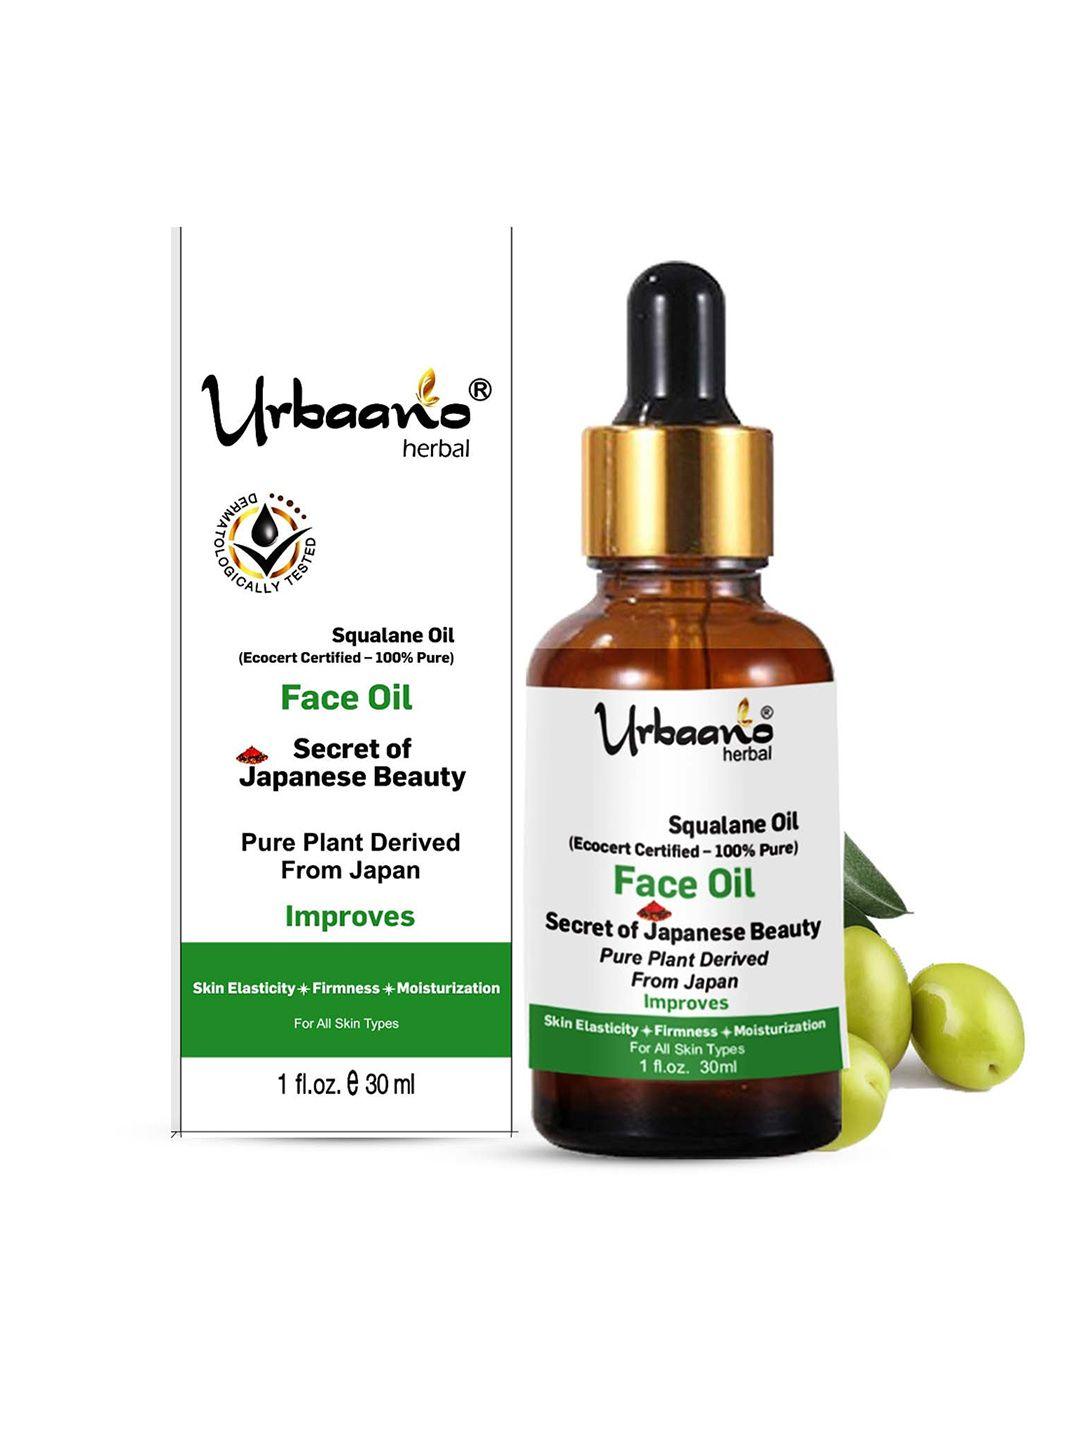 urbaano herbal secret of japanese beauty 100% pure & natural olive squalane oil - 30ml